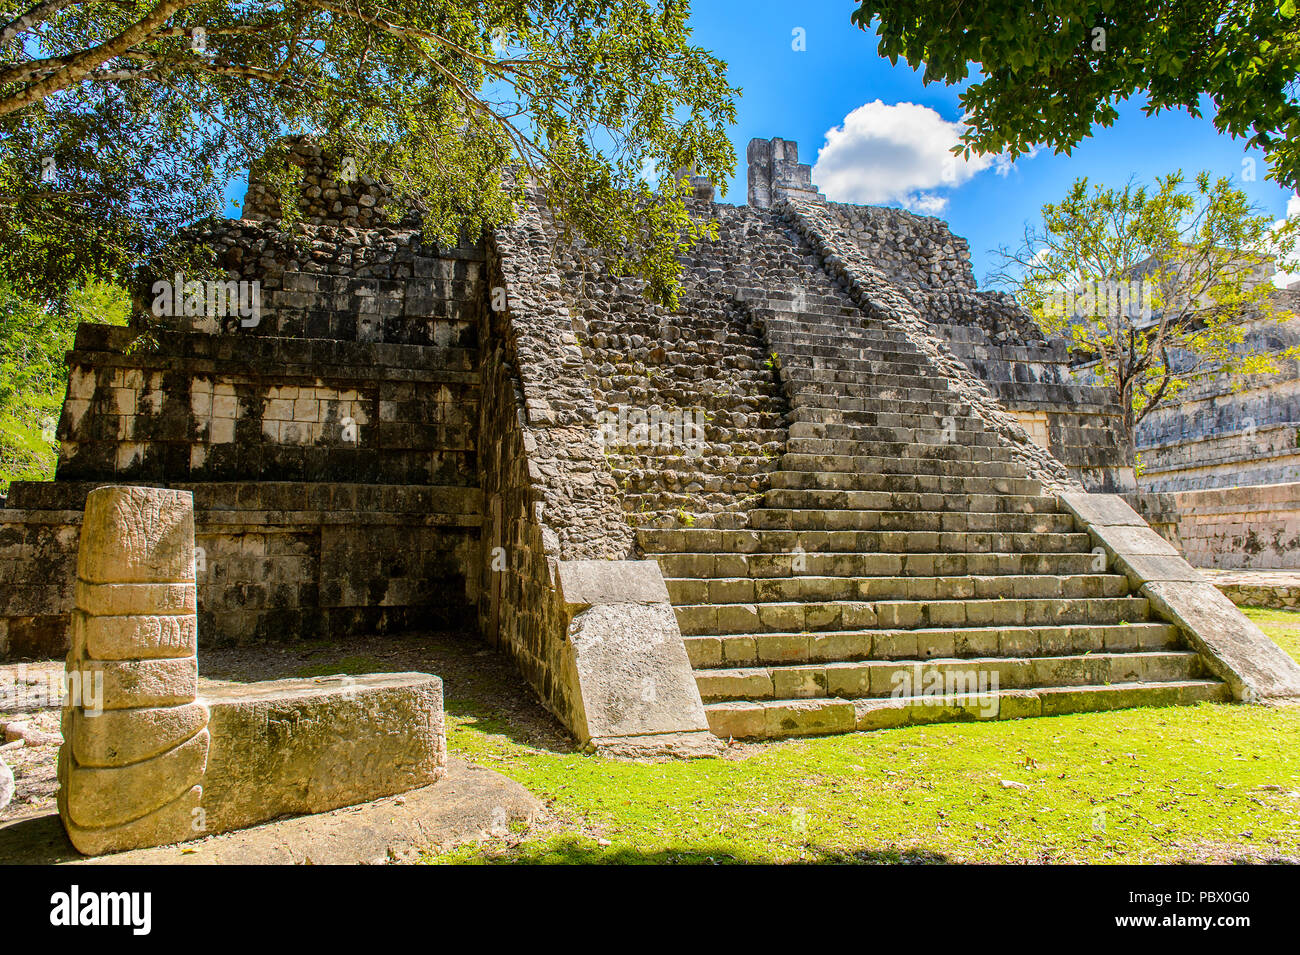 Chichen Itza, Tinum Municipality, Yucatan State. It was a large pre-Columbian city built by the Maya people of the Terminal Classic period. UNESCO Wor Stock Photo